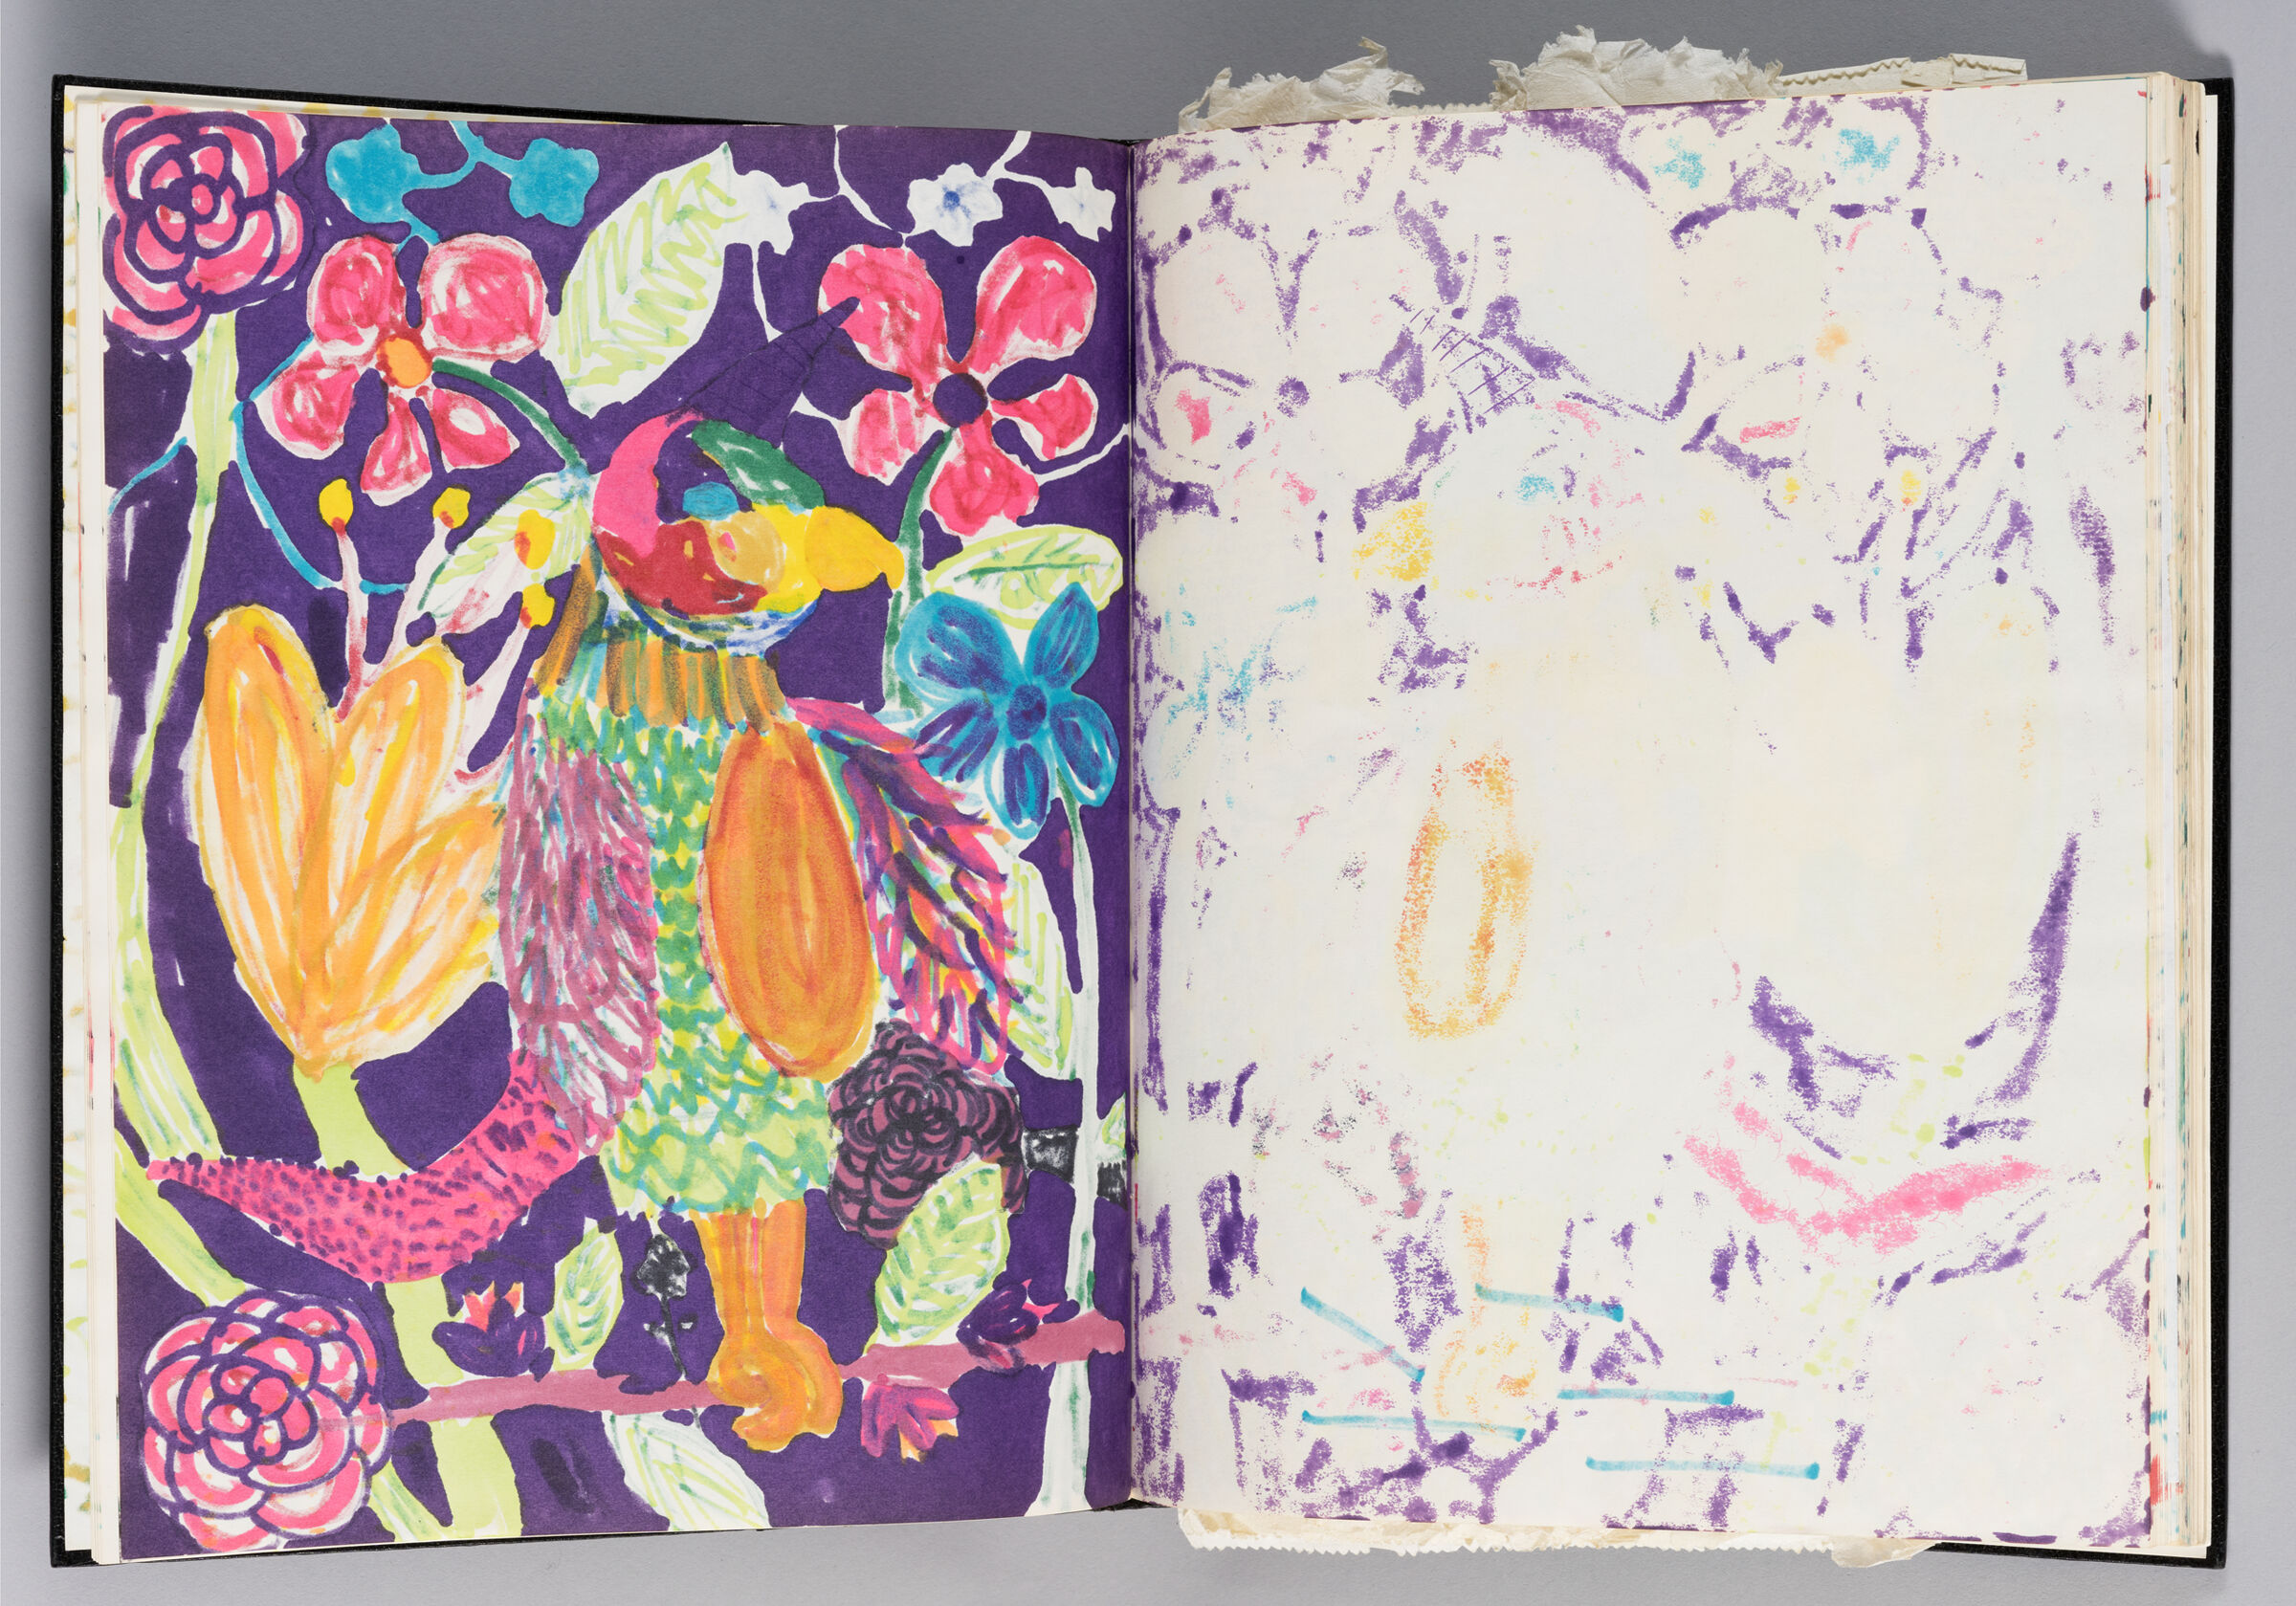 Untitled (Bleed-Through, Left Page); Untitled (Color Transfer, Right Page)